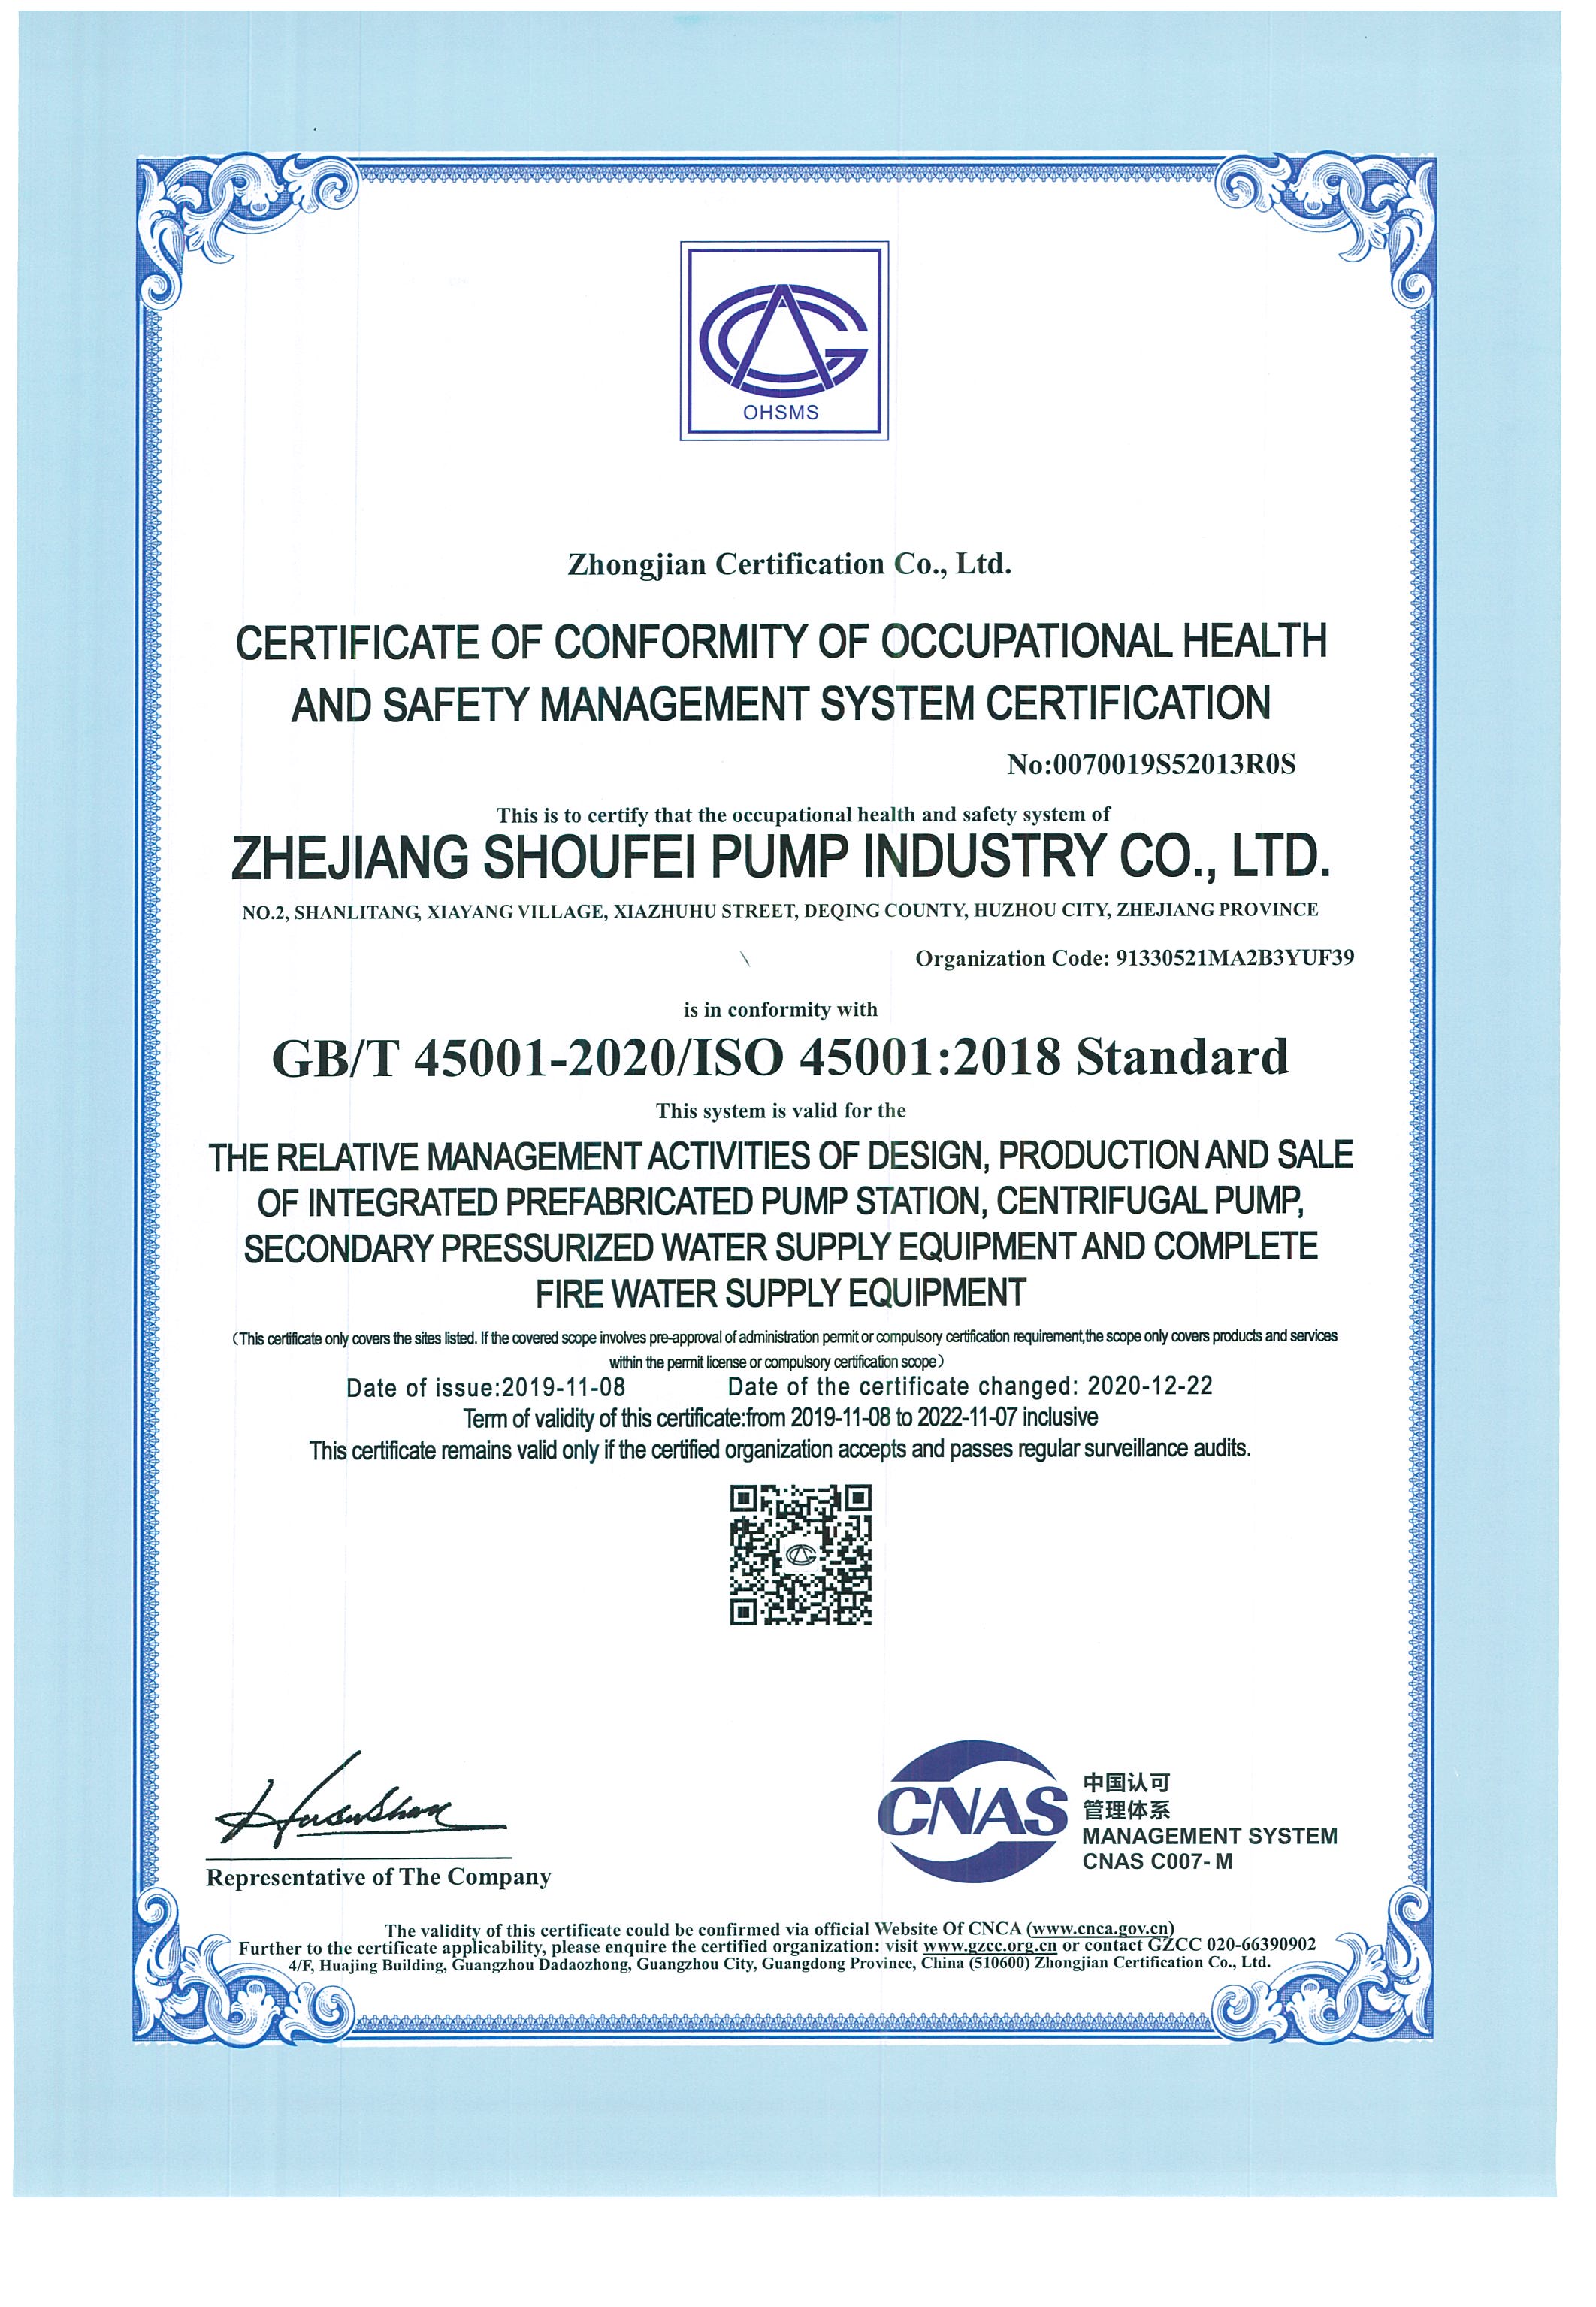 CERTIFICATE OF CONFORMITY OF OCCUPATIONAL HEALTH